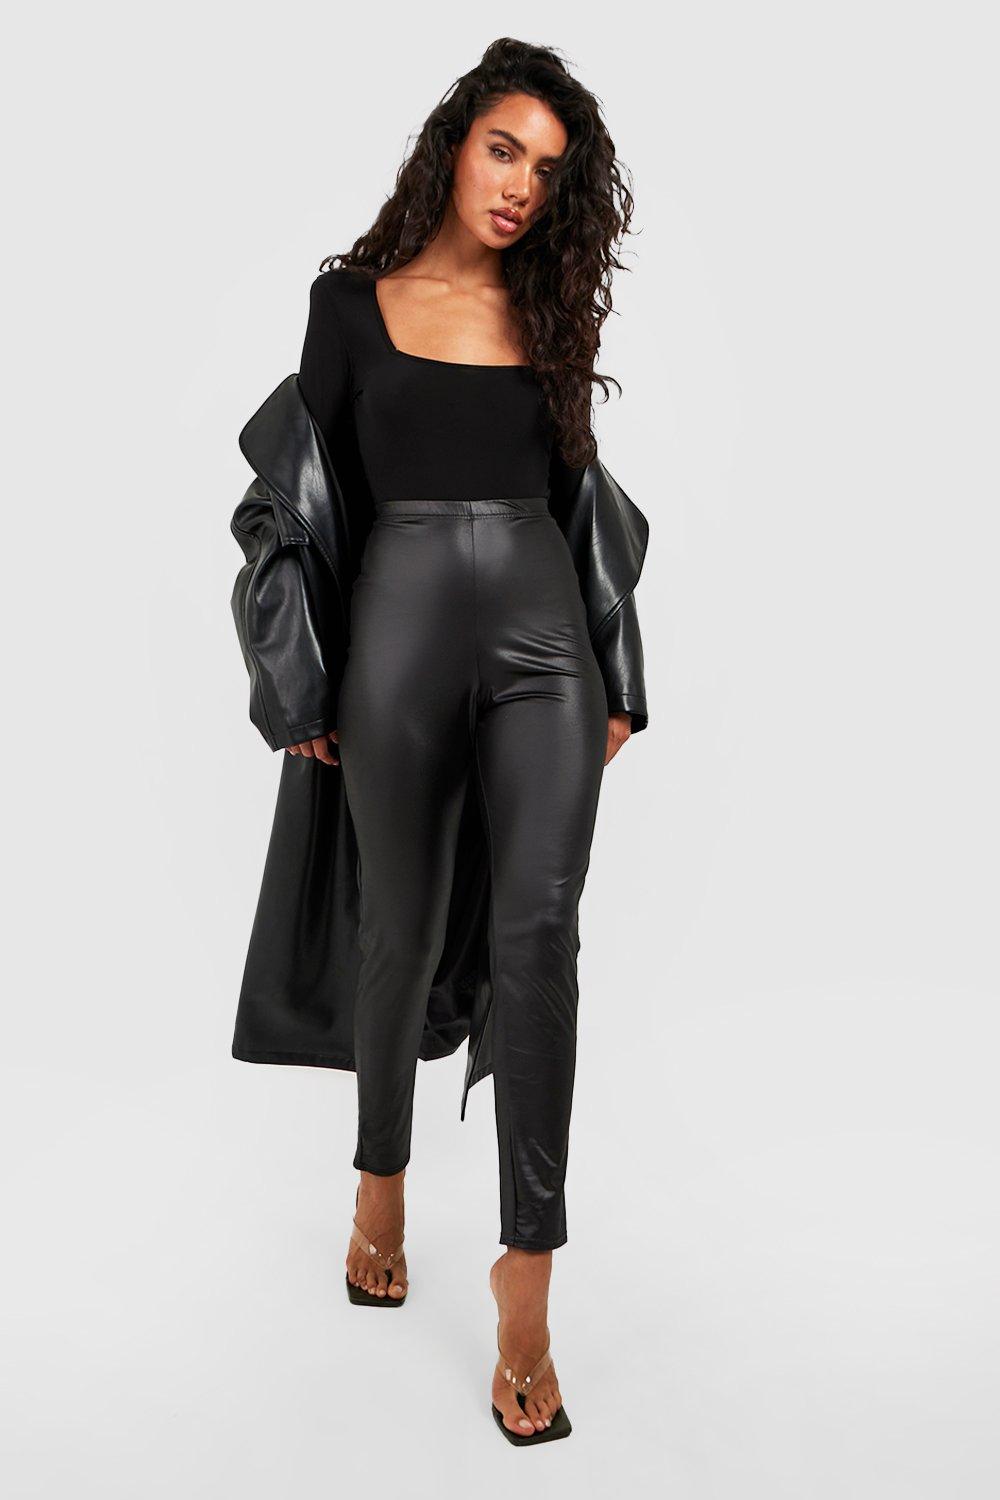 High Waisted Leather Look Leggings